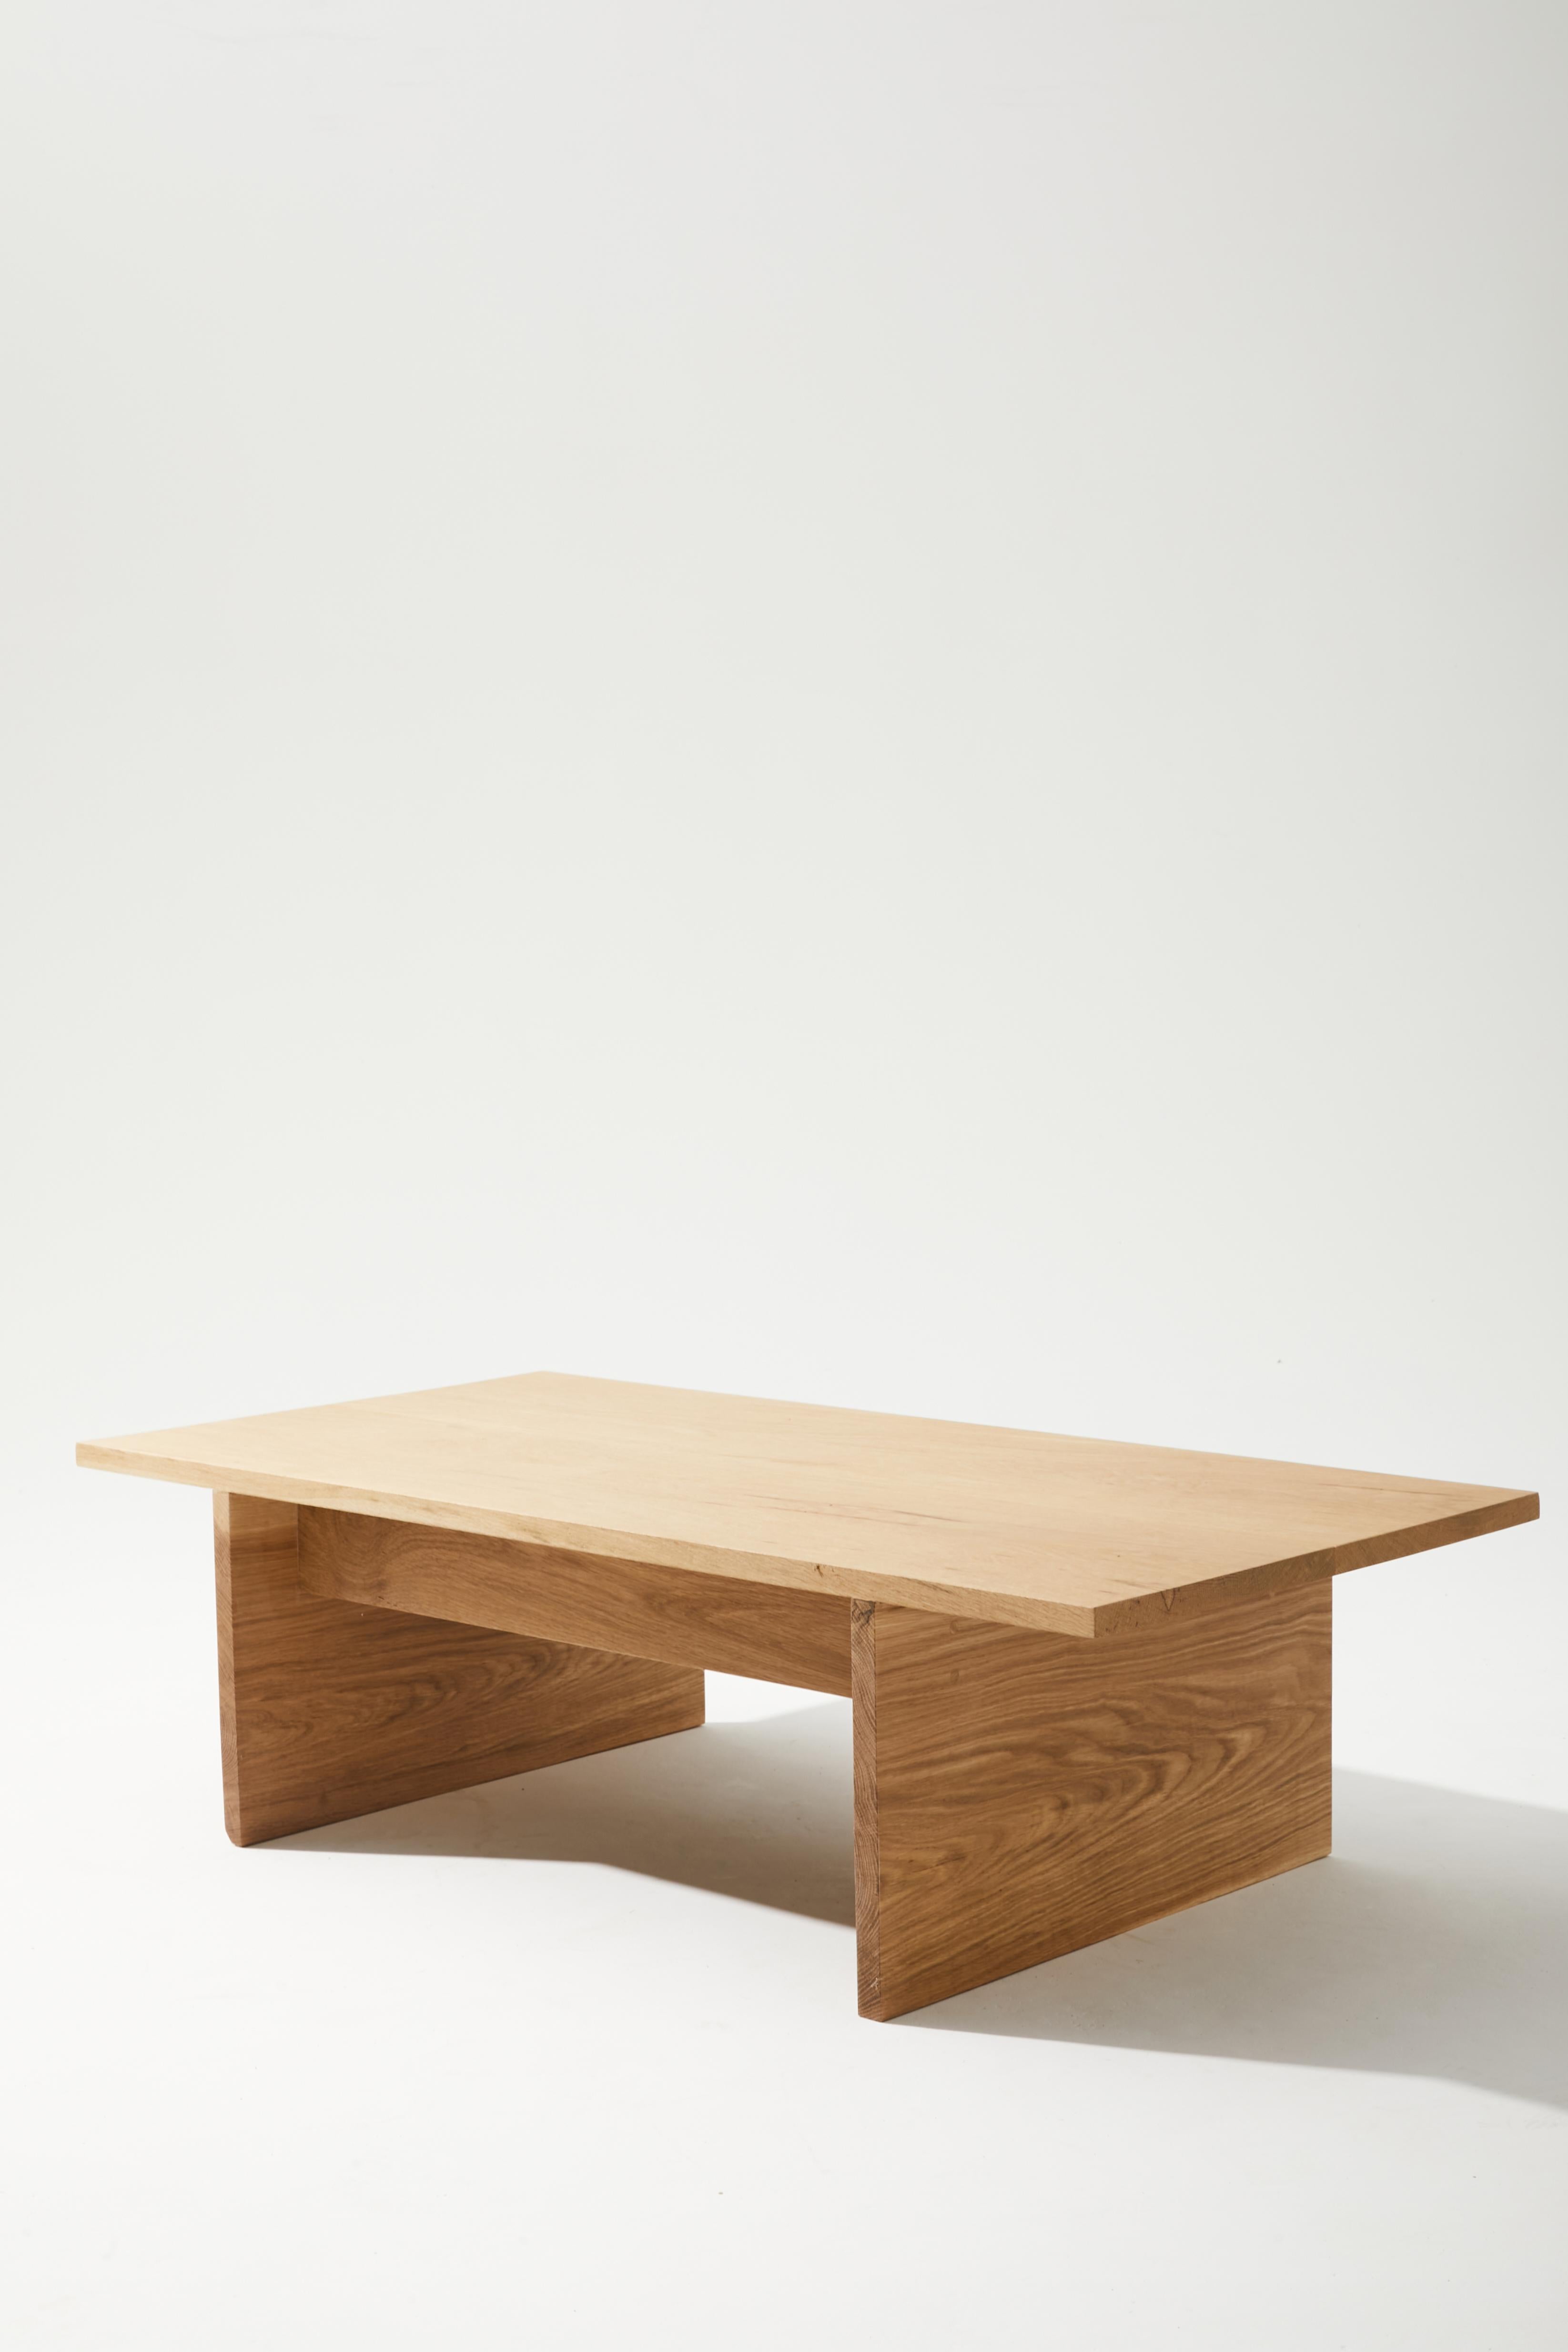 American Danish Japanese Inspired Solid White Oak/ Walnut Coffee Table by Stille Home For Sale